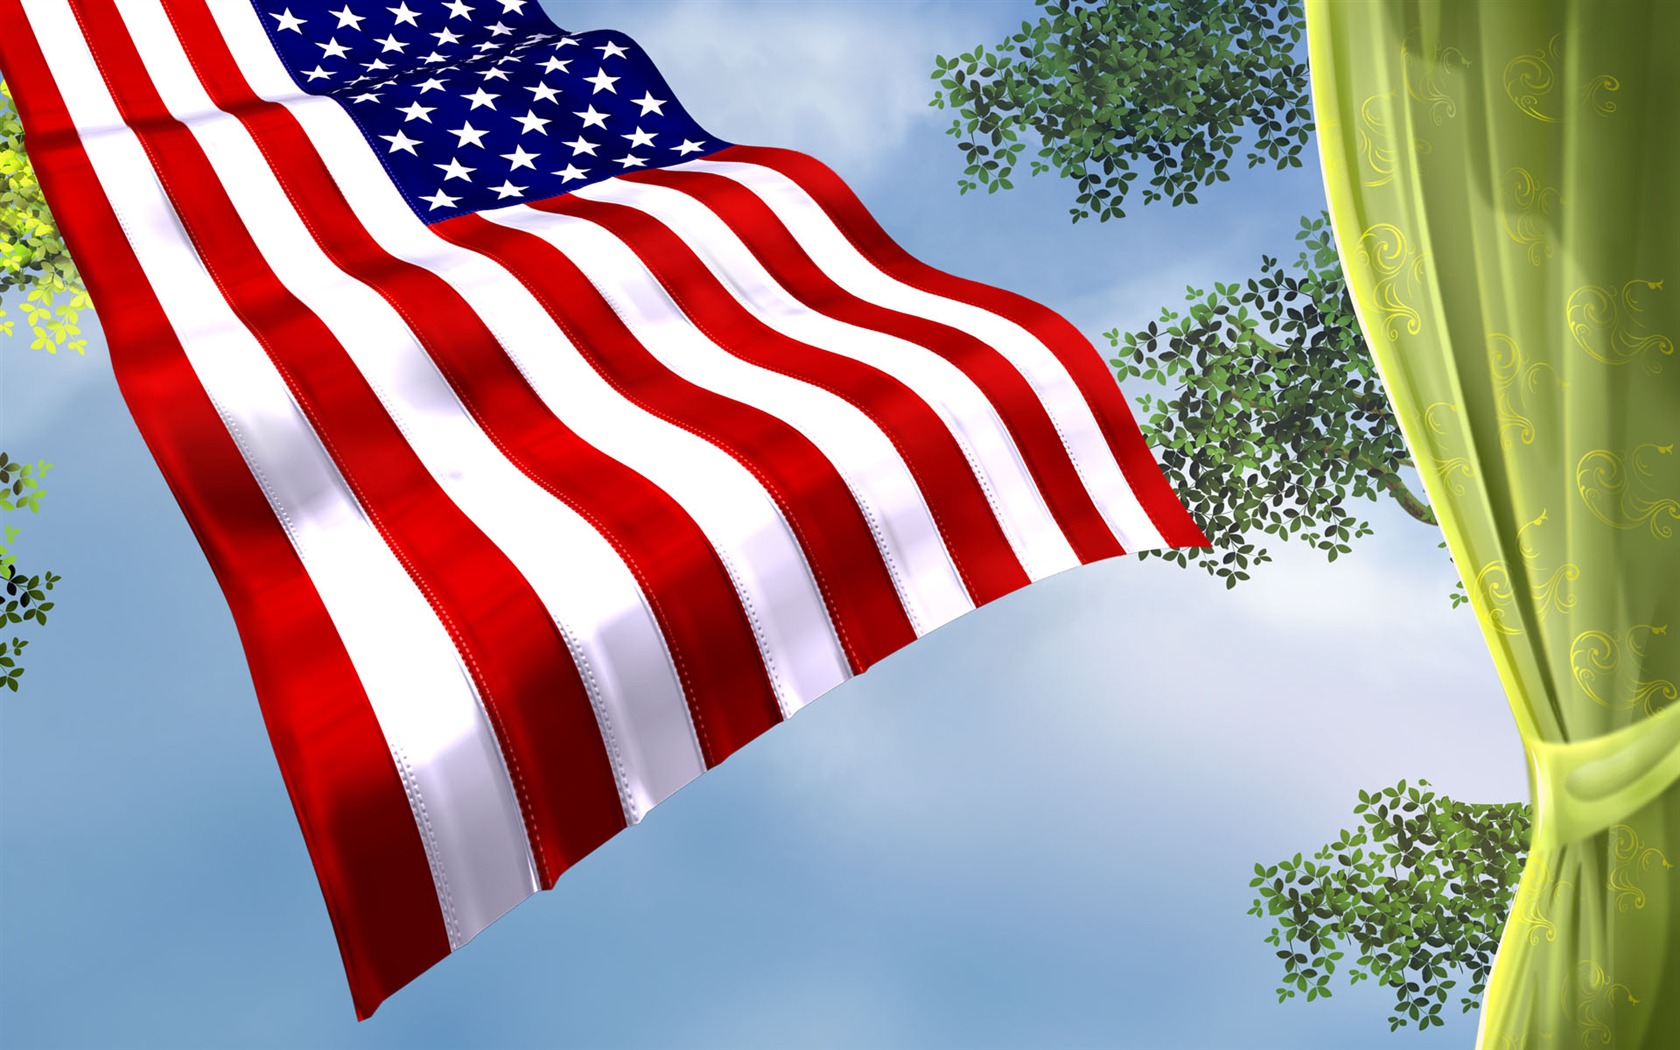 U.S. Independence Day theme wallpaper #33 - 1680x1050